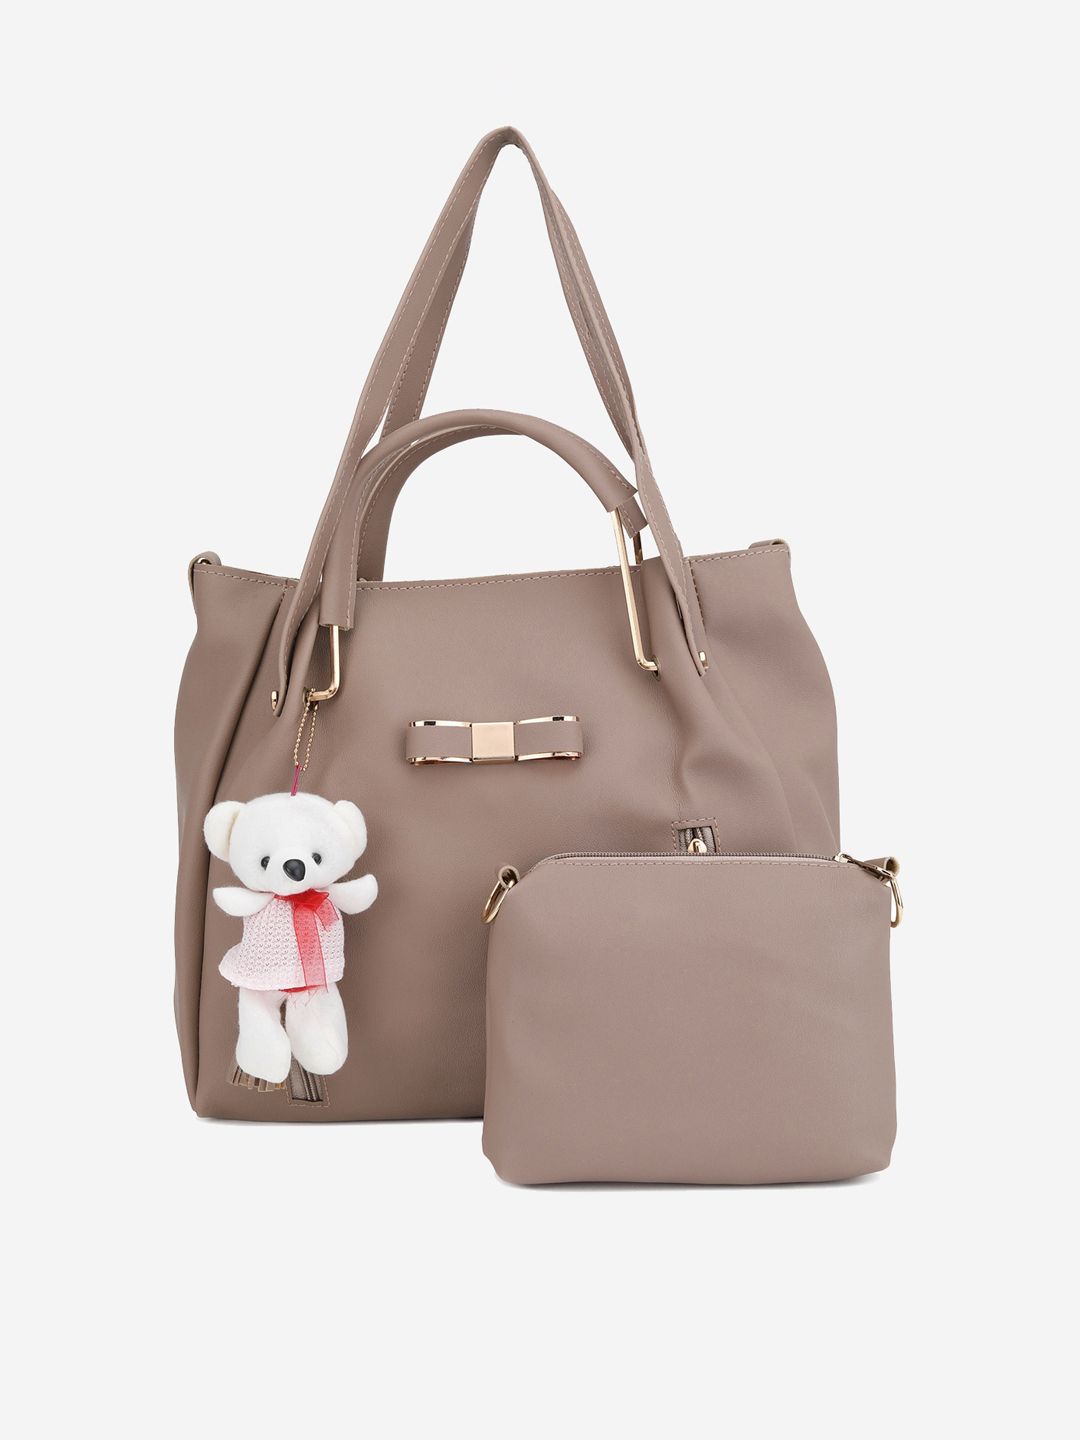 Stropcarry Beige Oversized Shopper Handheld Bag with Applique Price in India